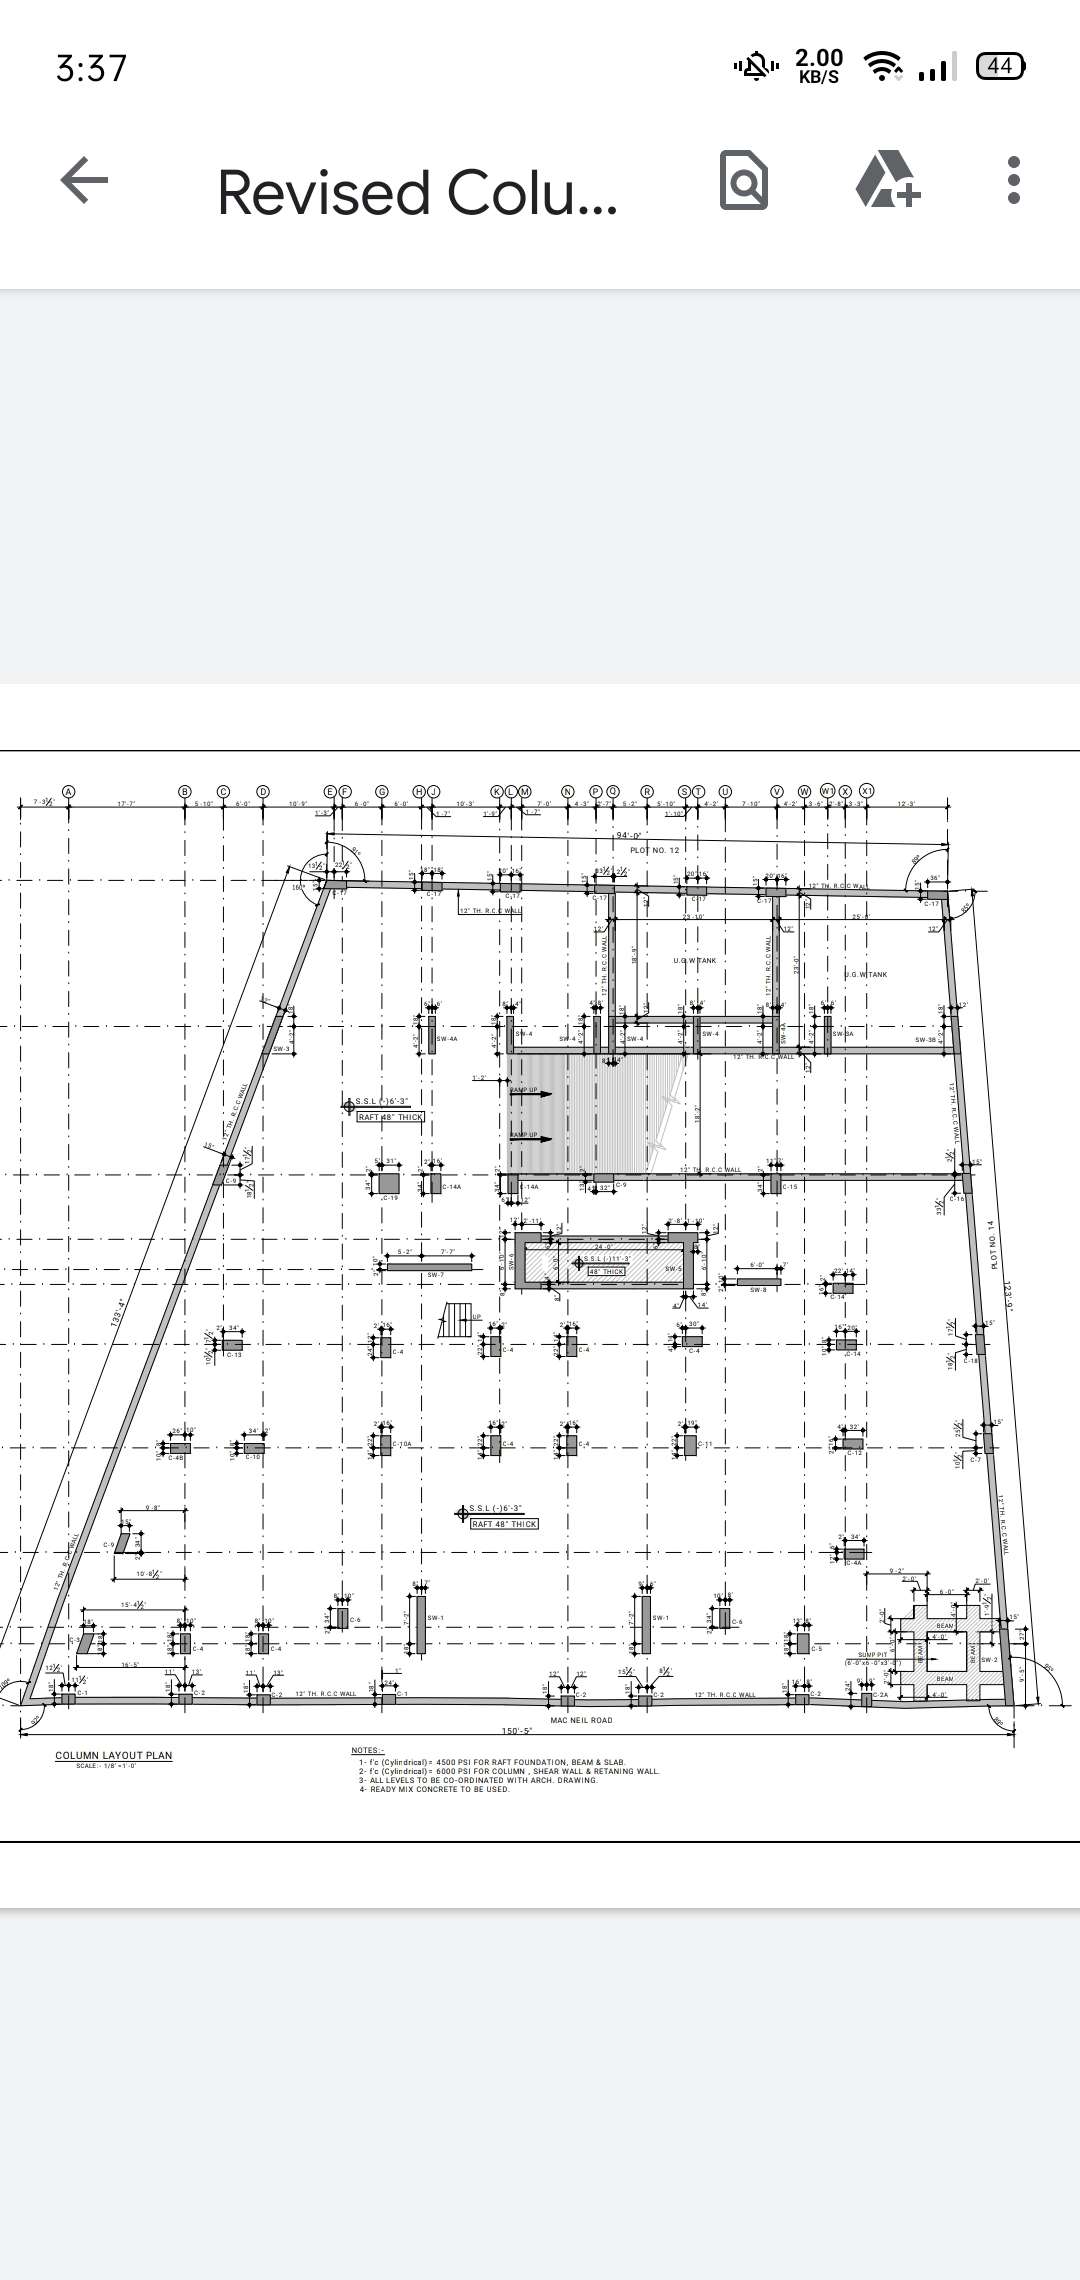 Any type of work regarding auto Cad Civil Engineering projects will be covered here